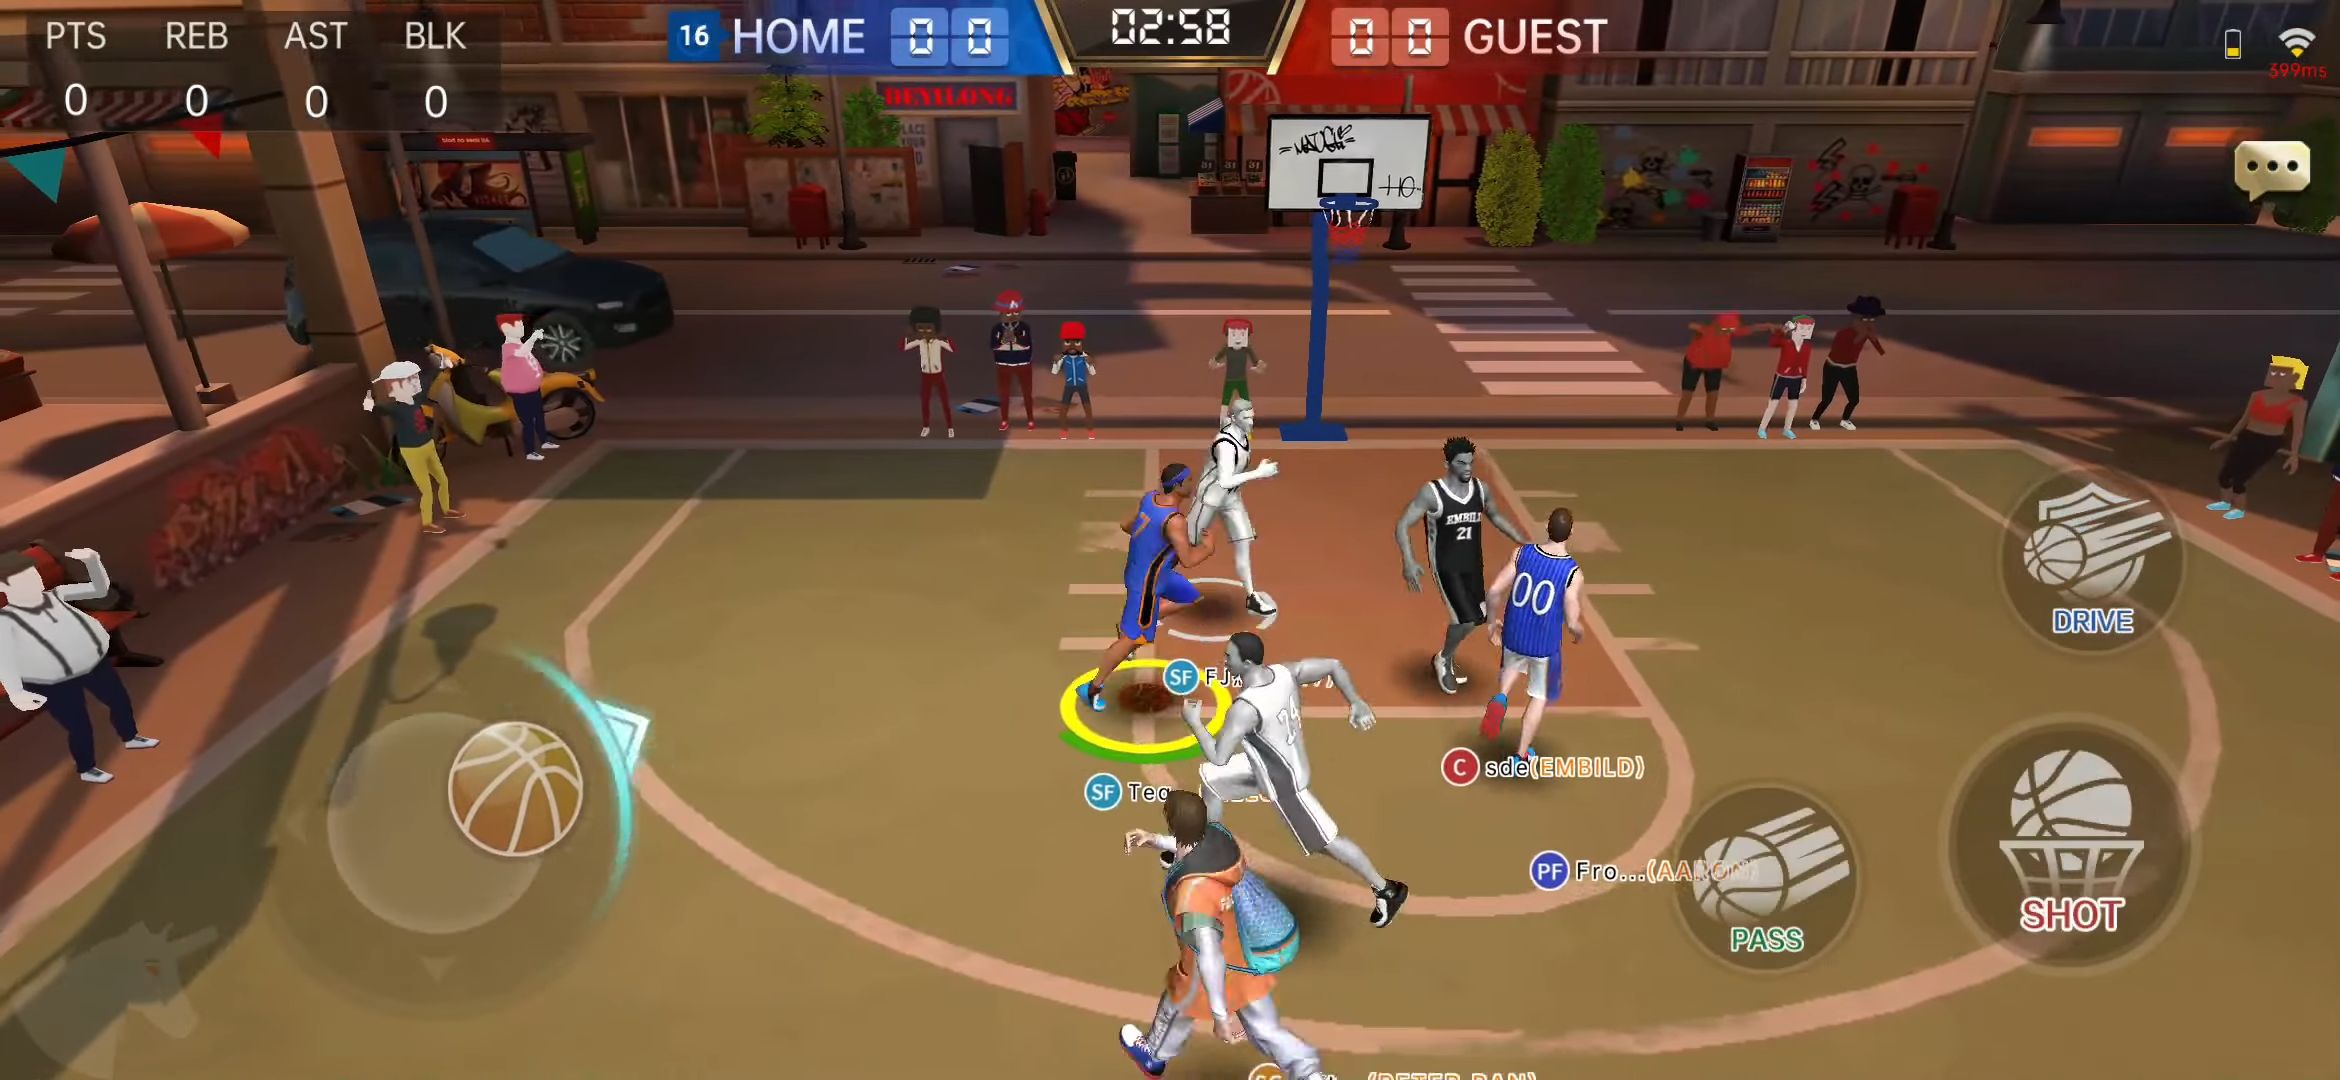 Gameplay of the Basketball Grand Slam for Android phone or tablet.